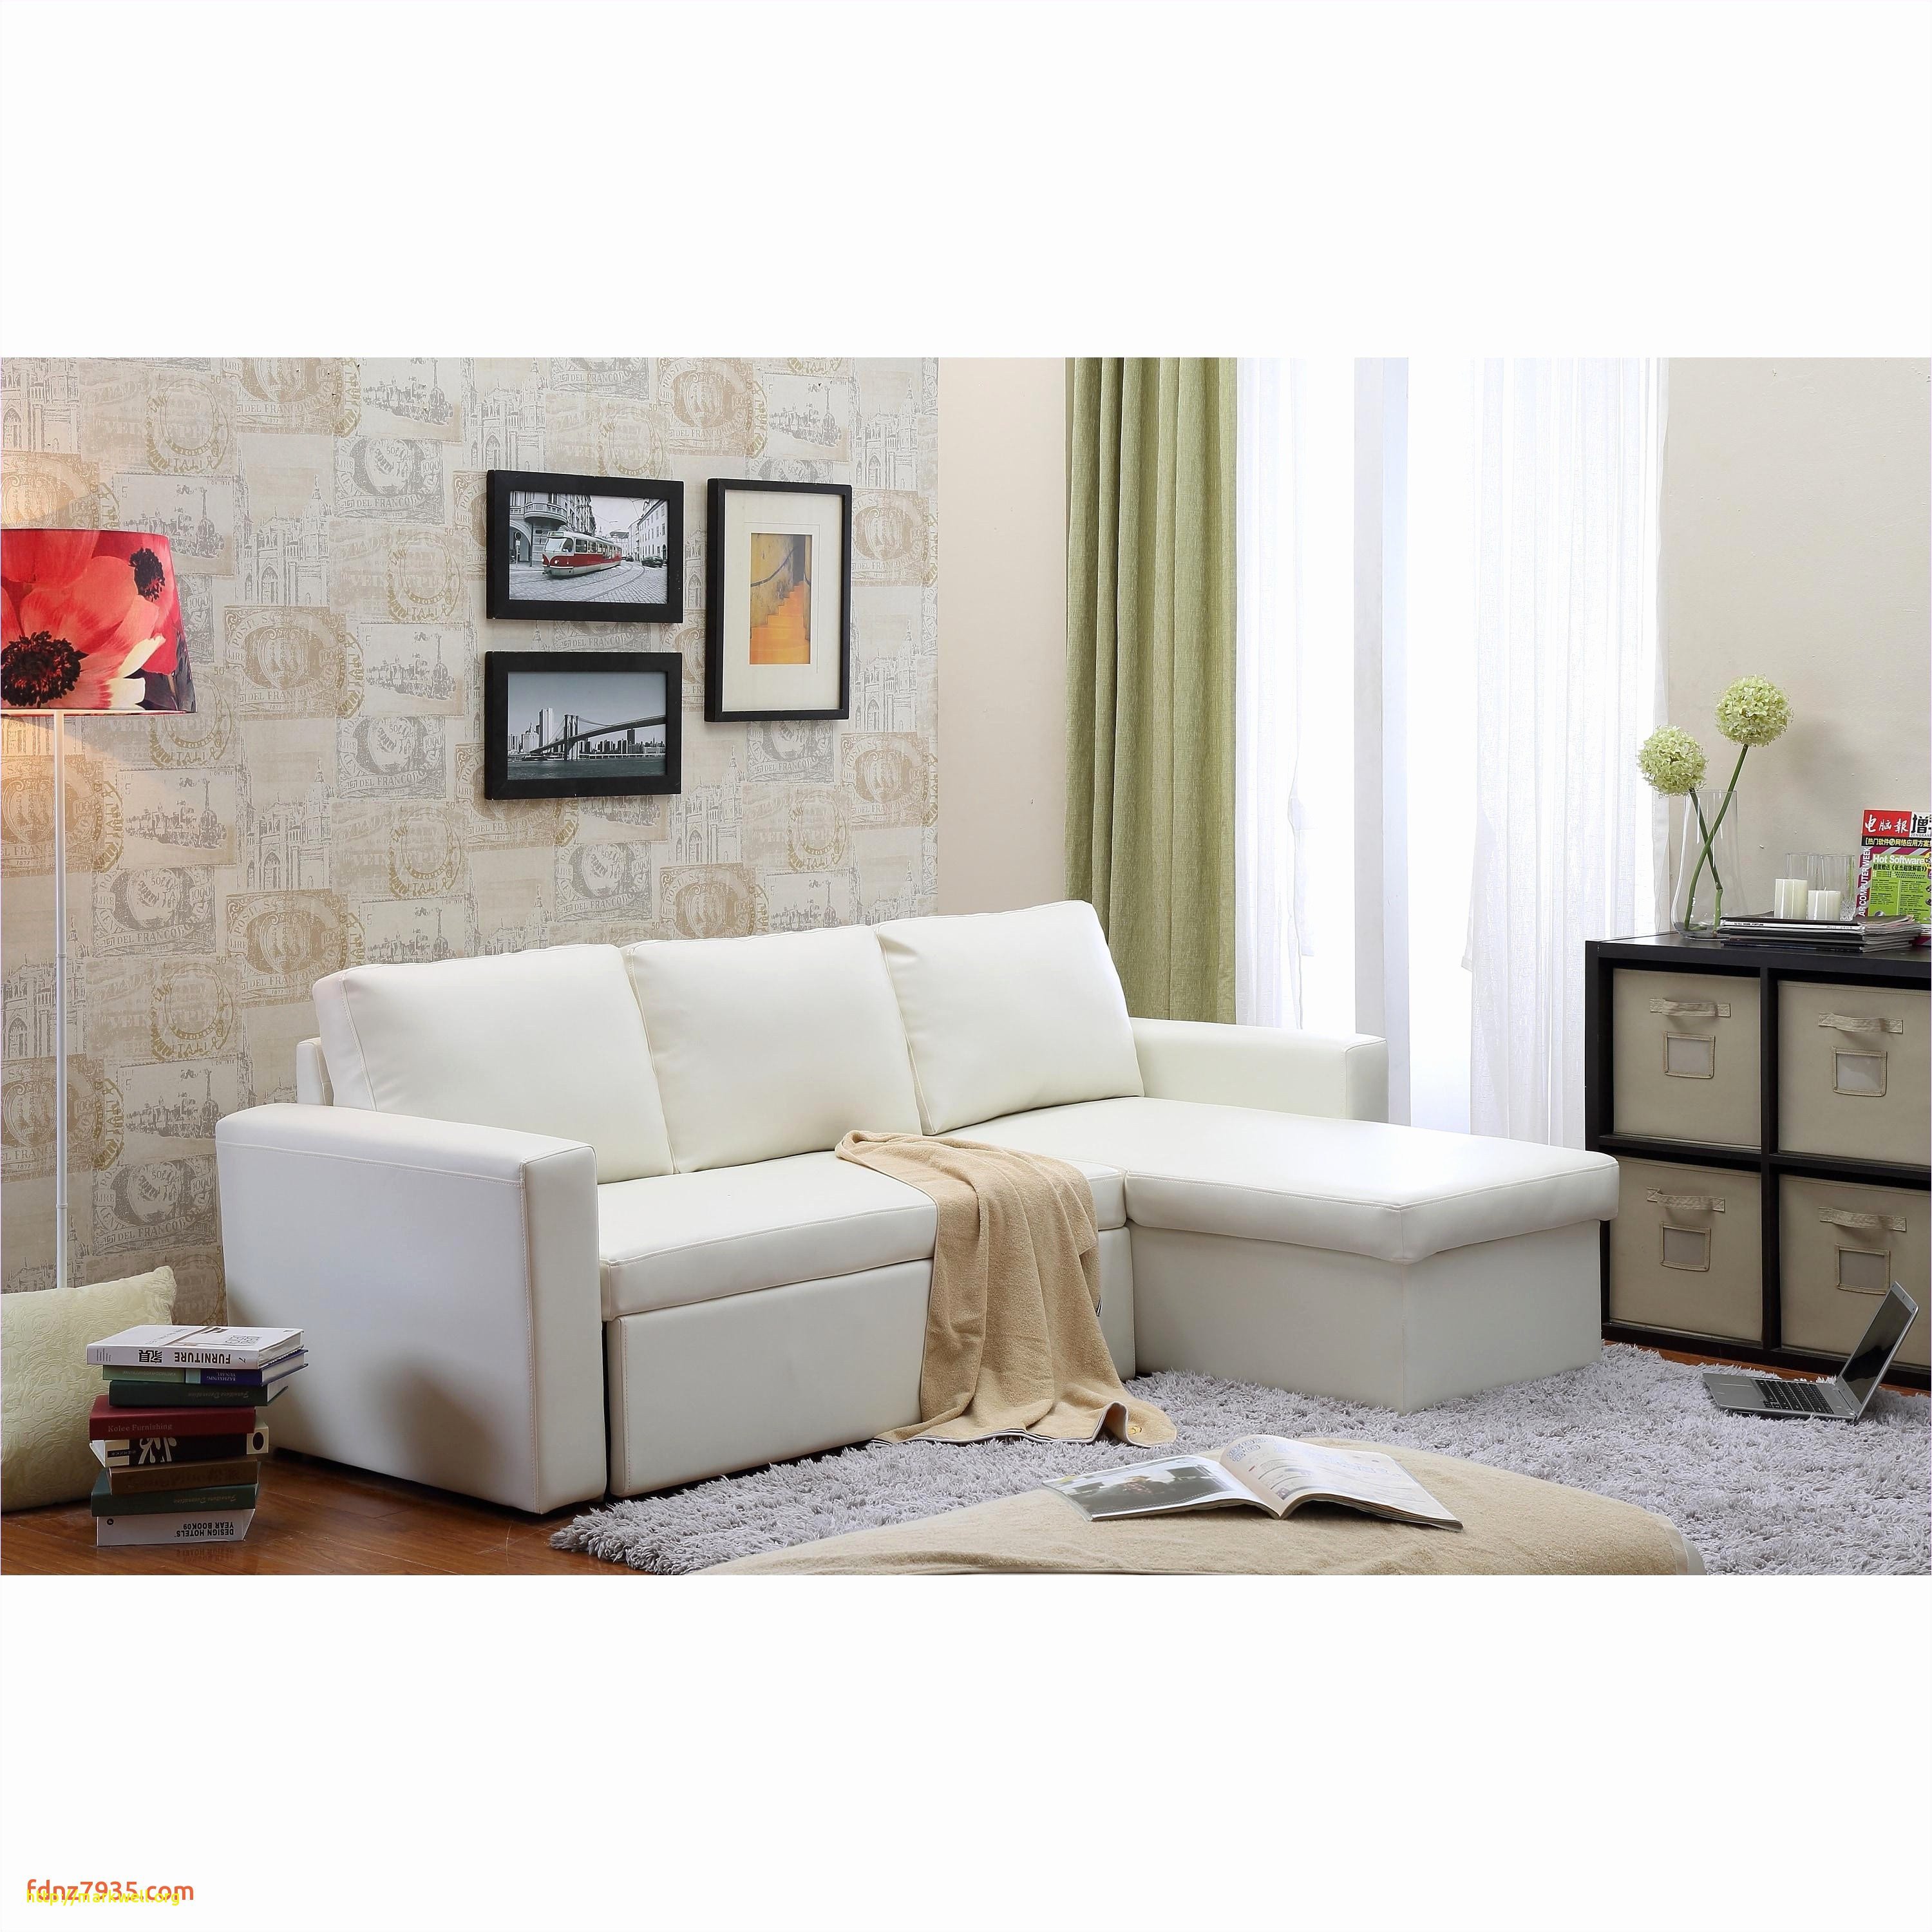 Small Loveseat for Bedroom Elegant Awesome Bobs Living Room Furniture